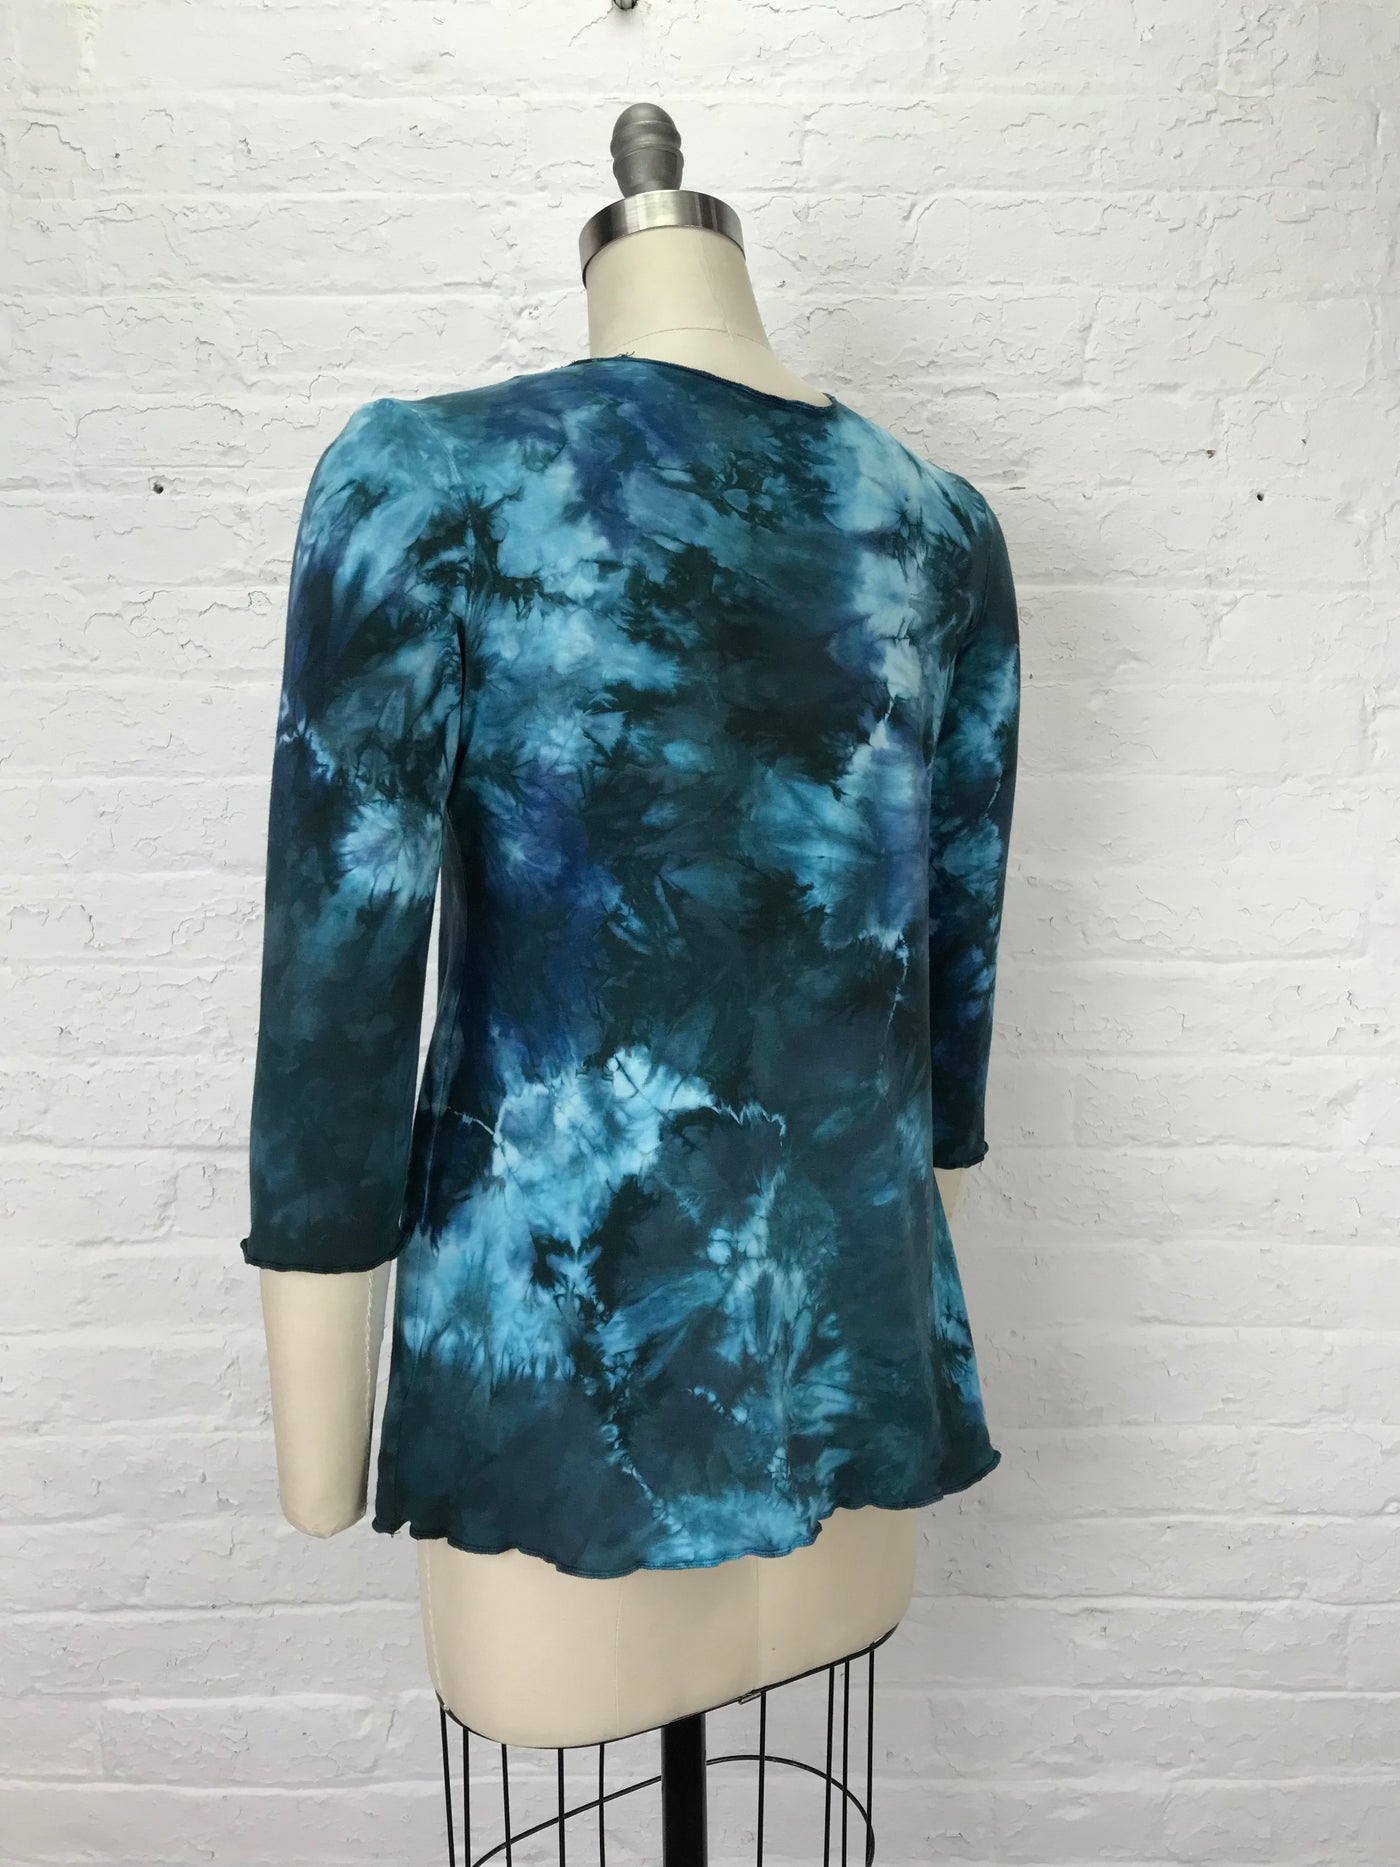 Jane 3/4 Top in Dolphin Tangle